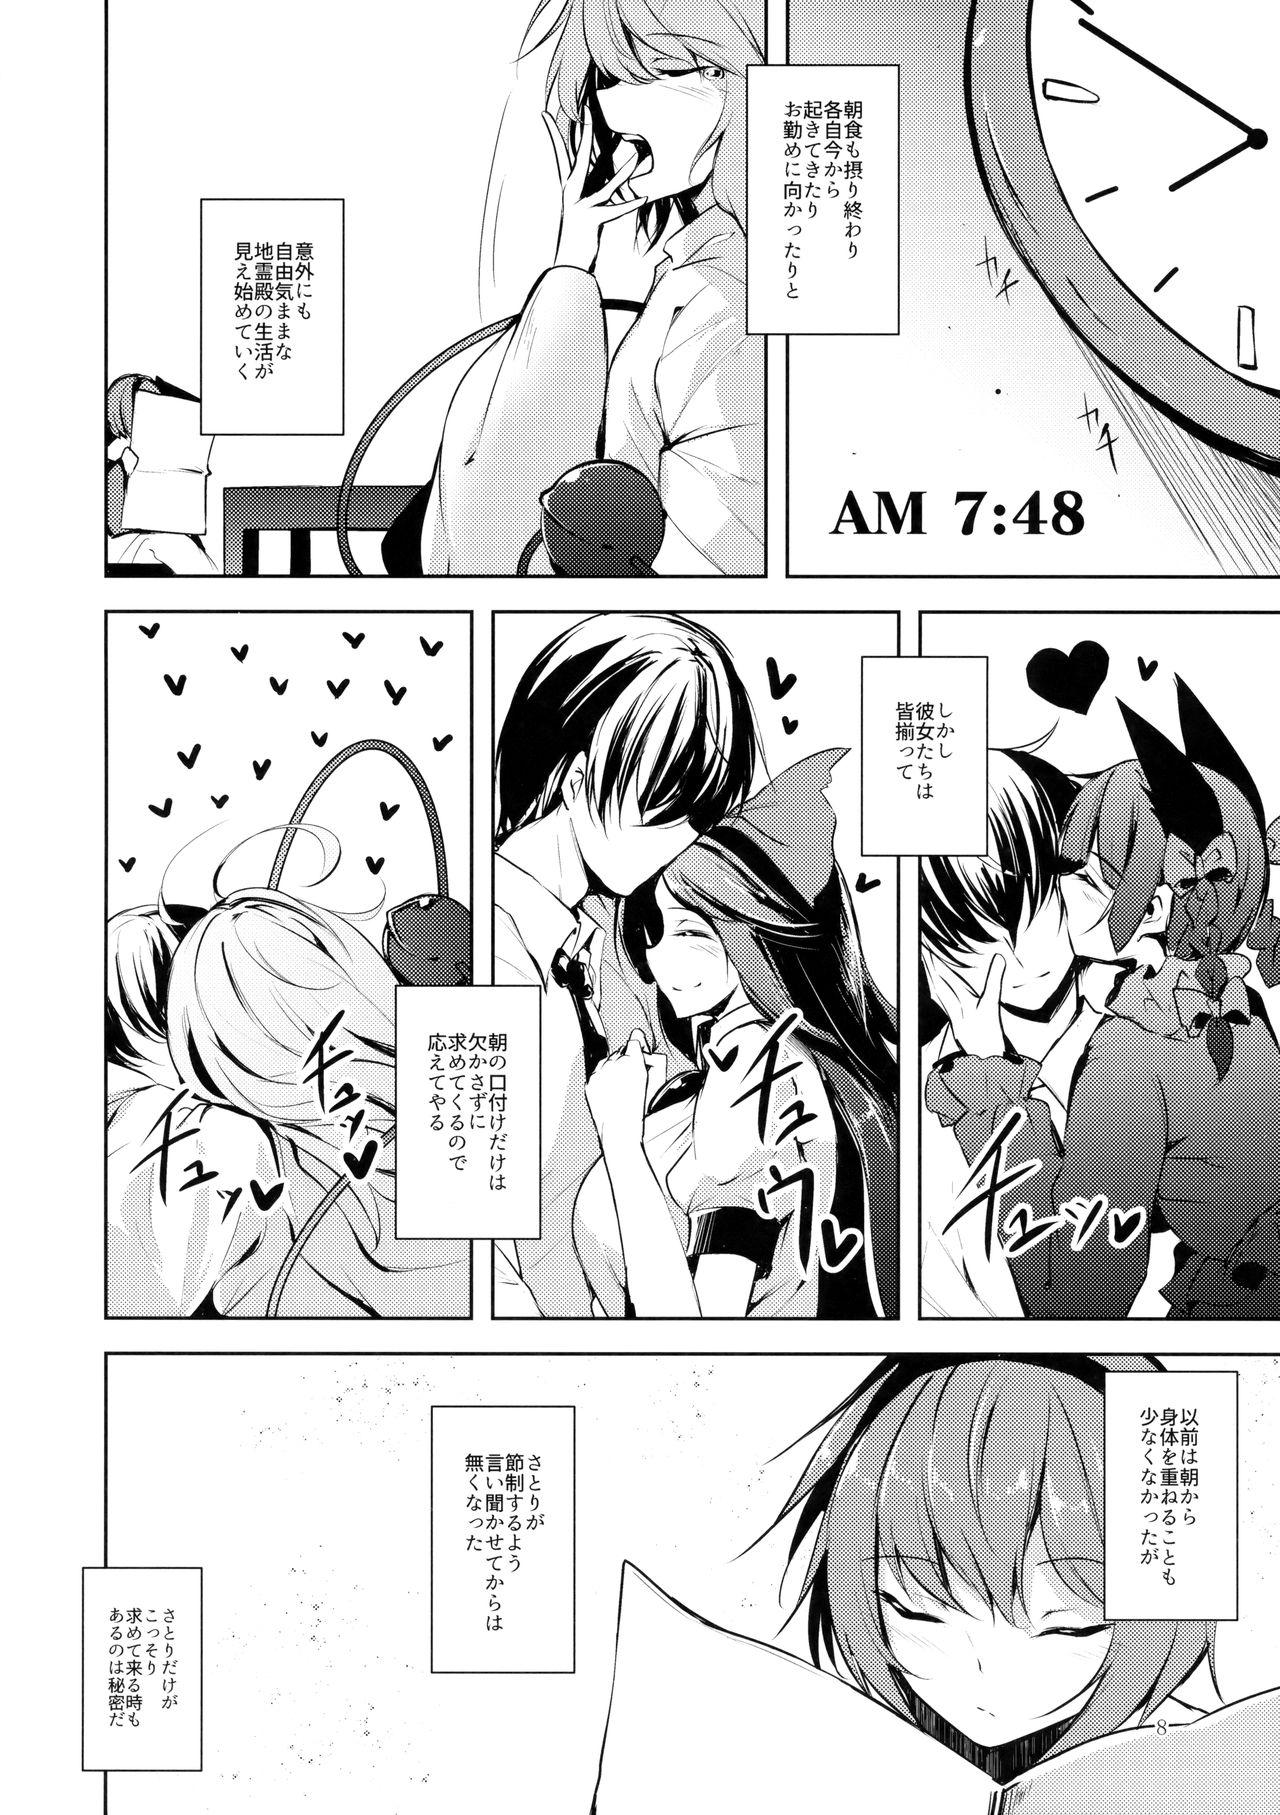 Doggy Style Porn Komeiji Schedule AM - Touhou project Grosso - Page 9